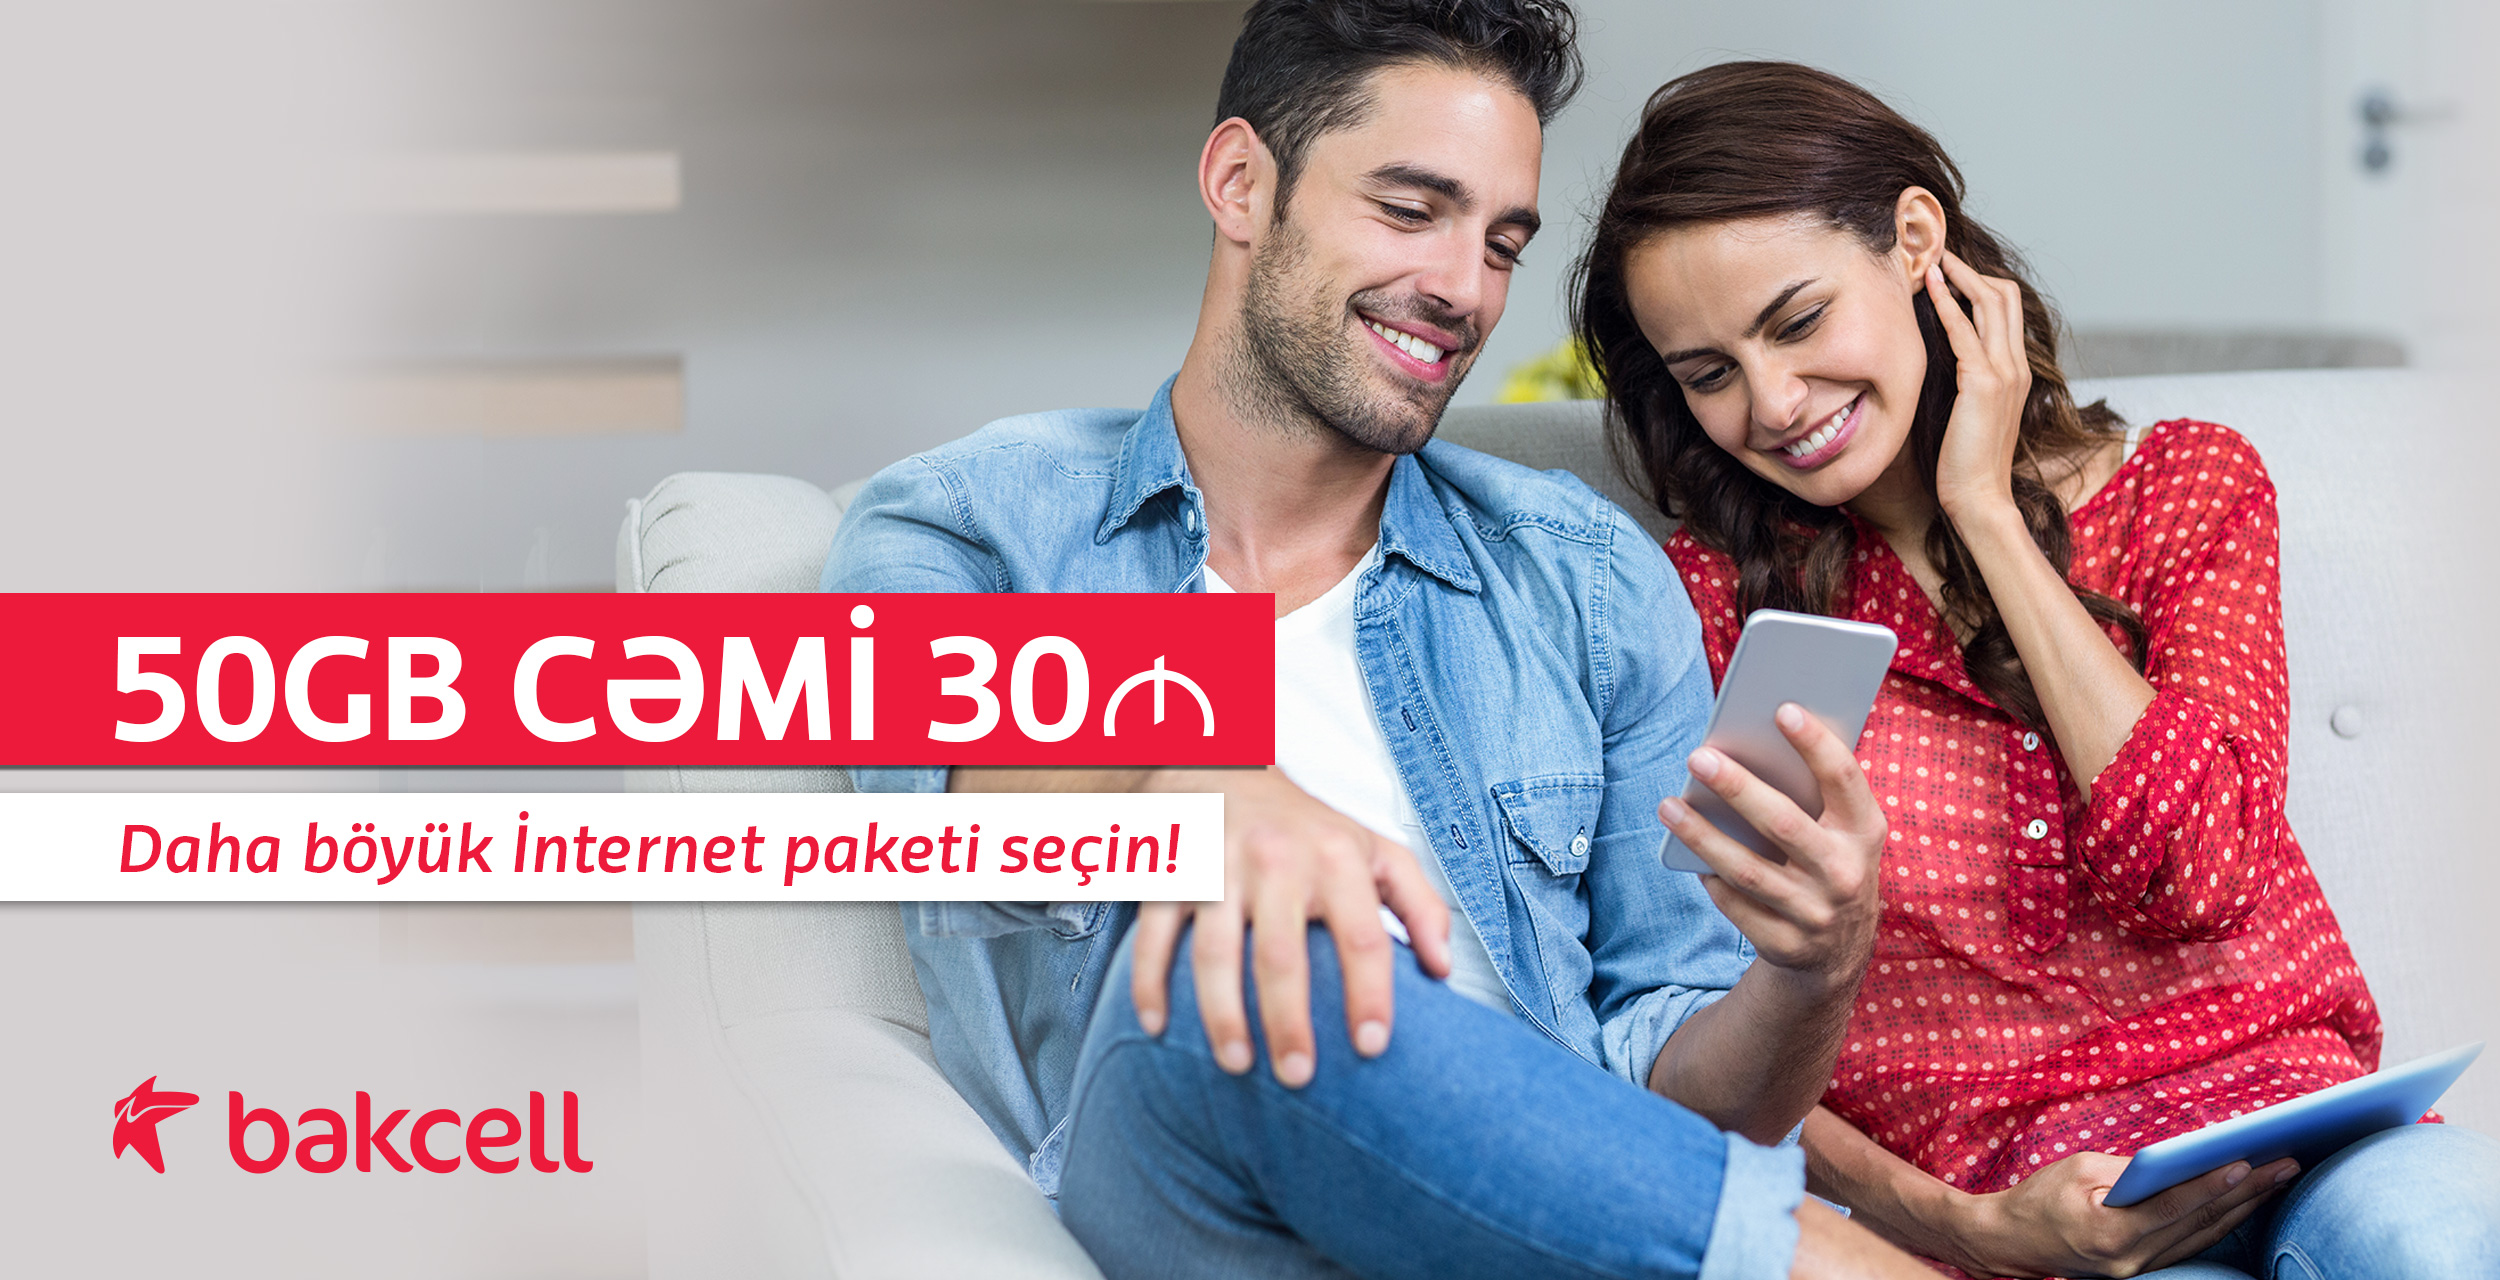 Bakcell offers 50 GB just for 30 AZN in the Fastest Mobile Network of Azerbaijan